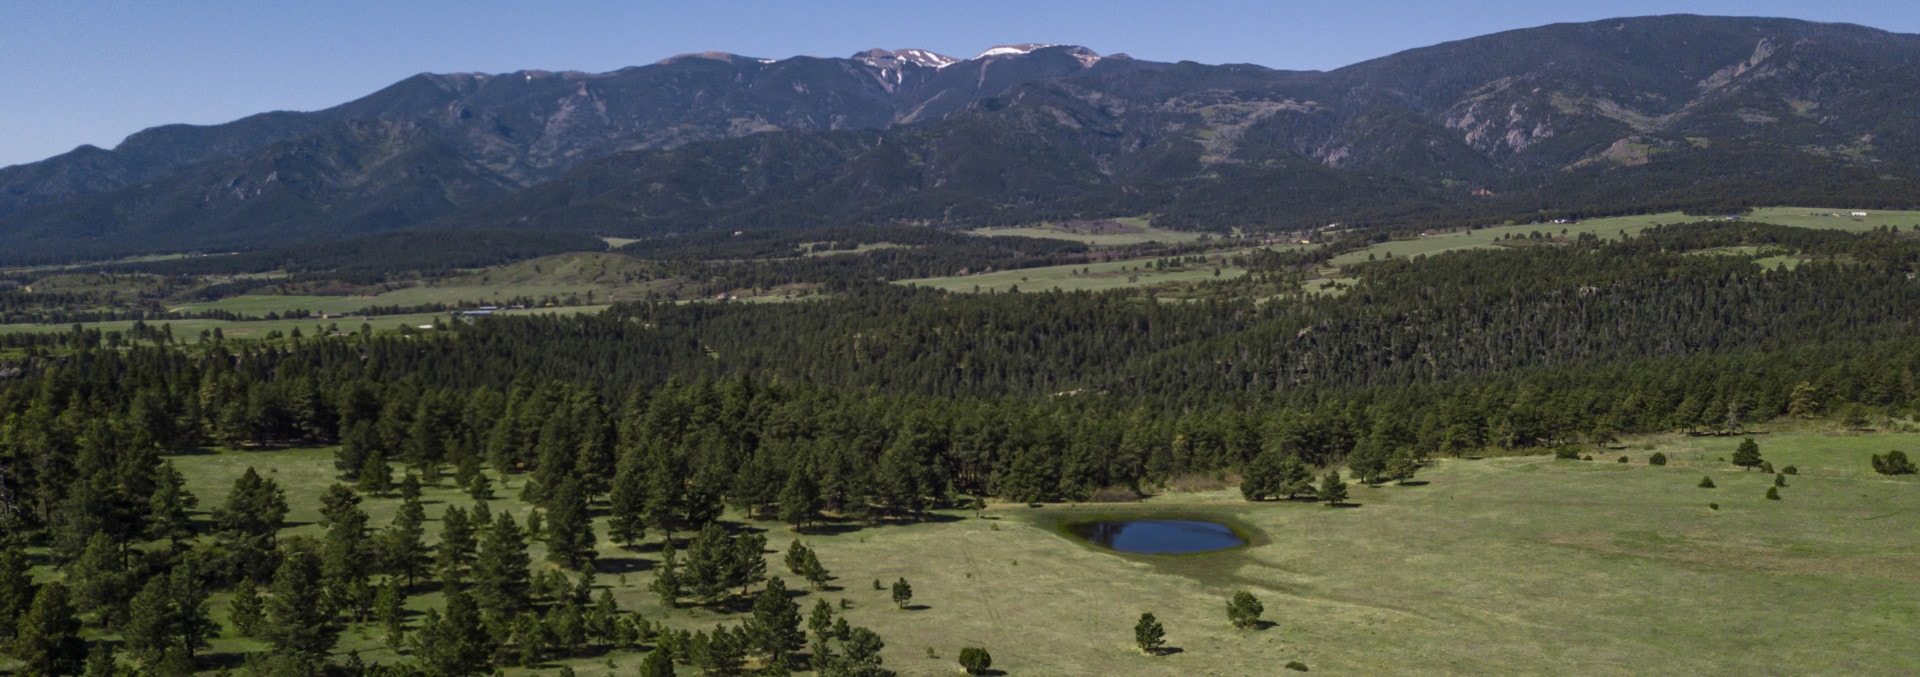 Colorado Springs, CO Land for Sale -- Acerage, Cheap Land & Lots for Sale -  Redfin